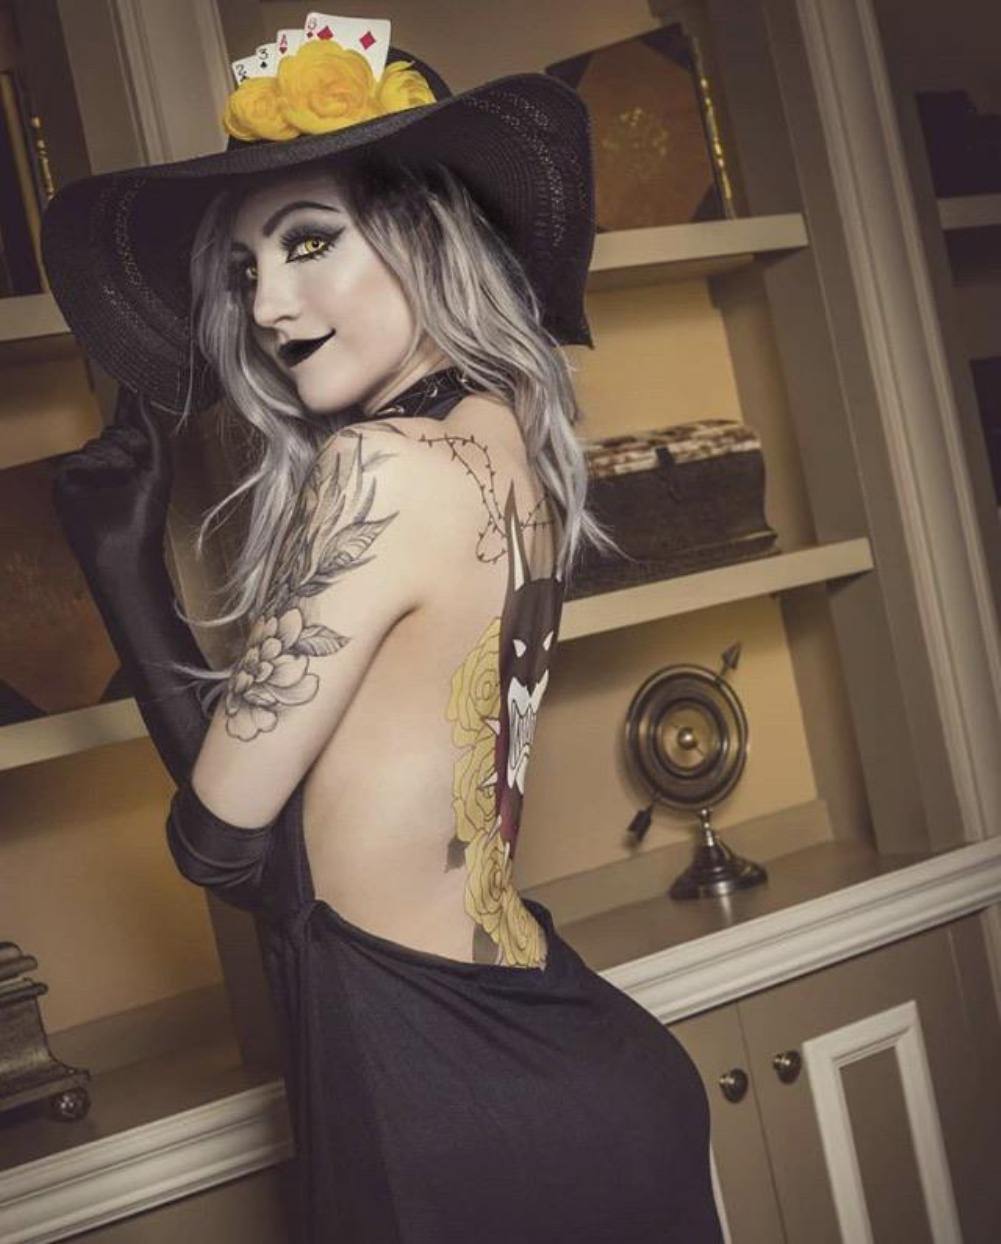  Shadow sae by luxlocosplay